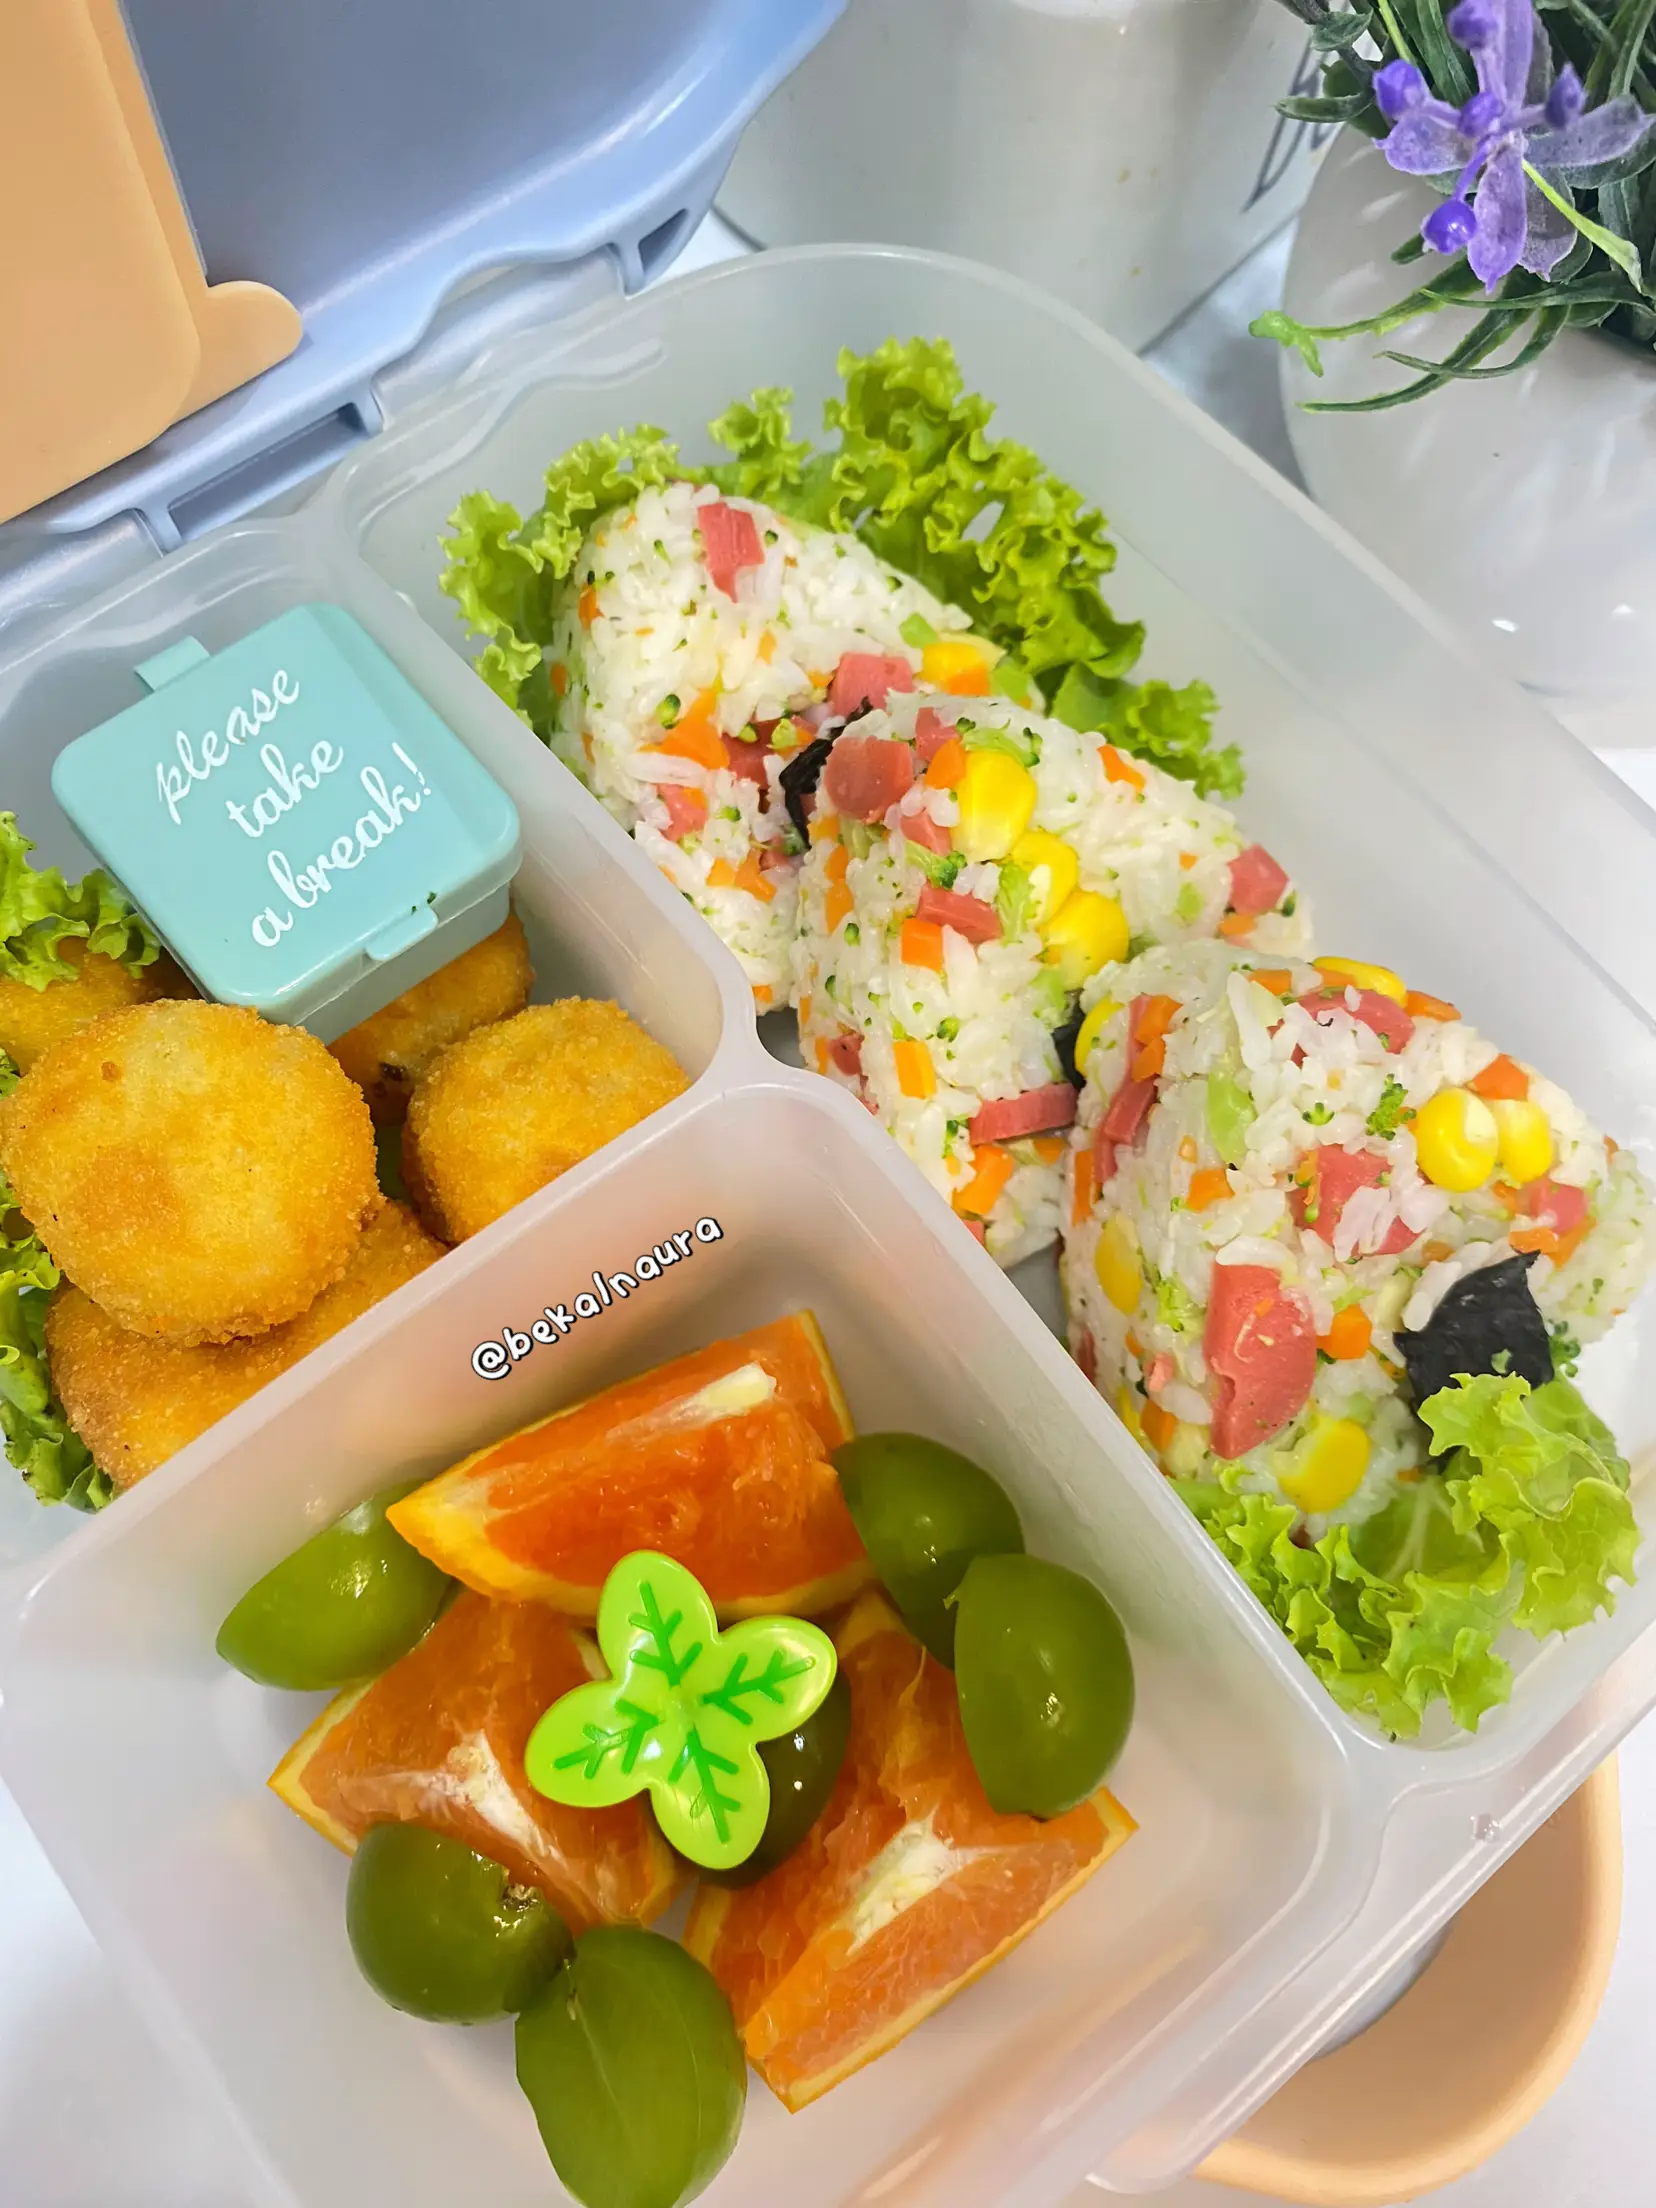 Bento School Lunches : Bear bento and Tortilla Pinwheels in New Bentgo Kids  with Review (2)